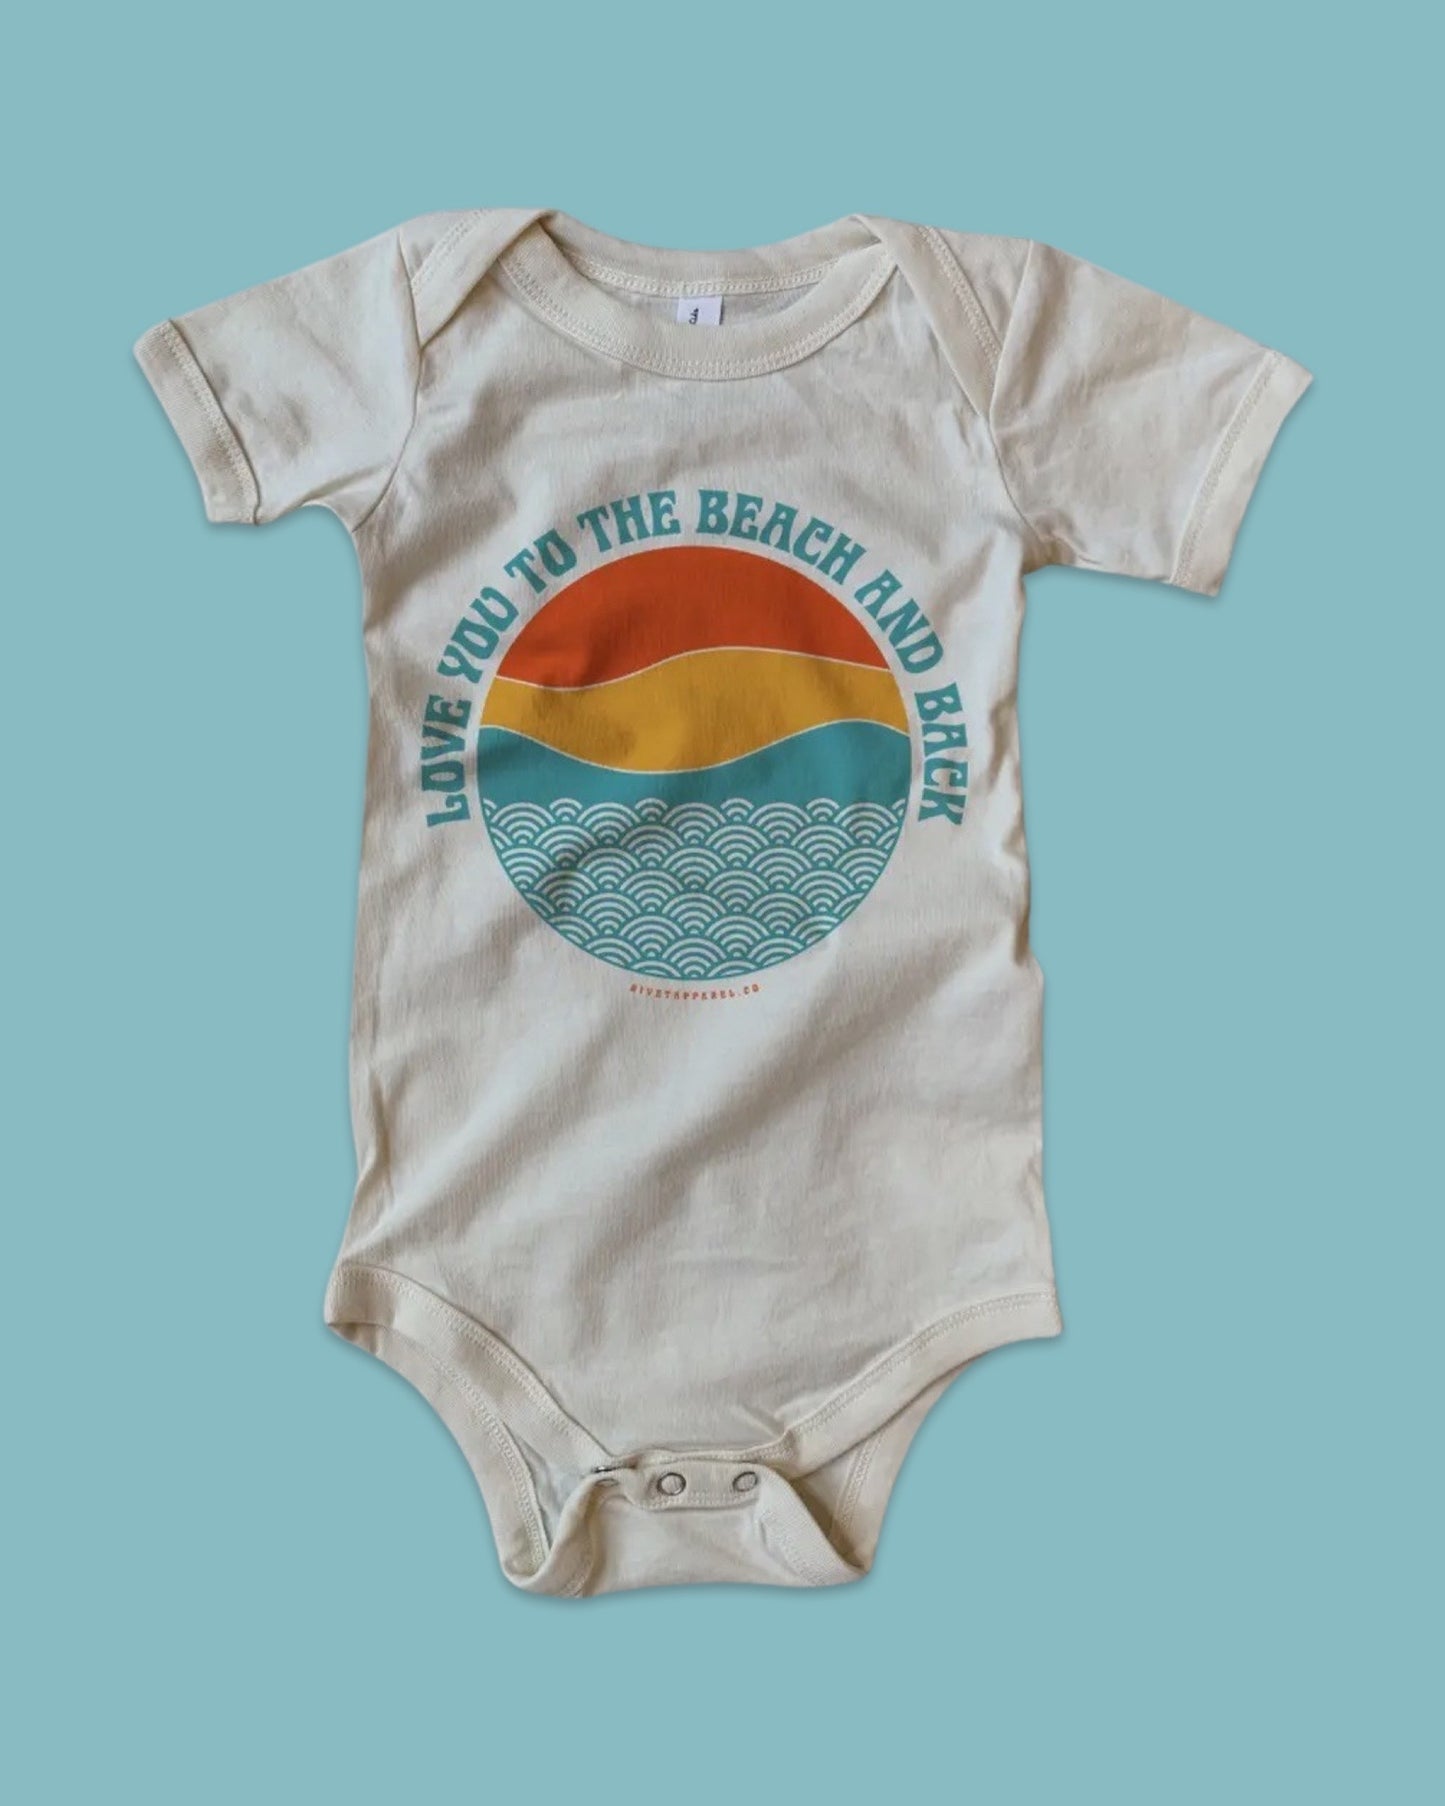 Love You To The Beach and Back Baby Onesie